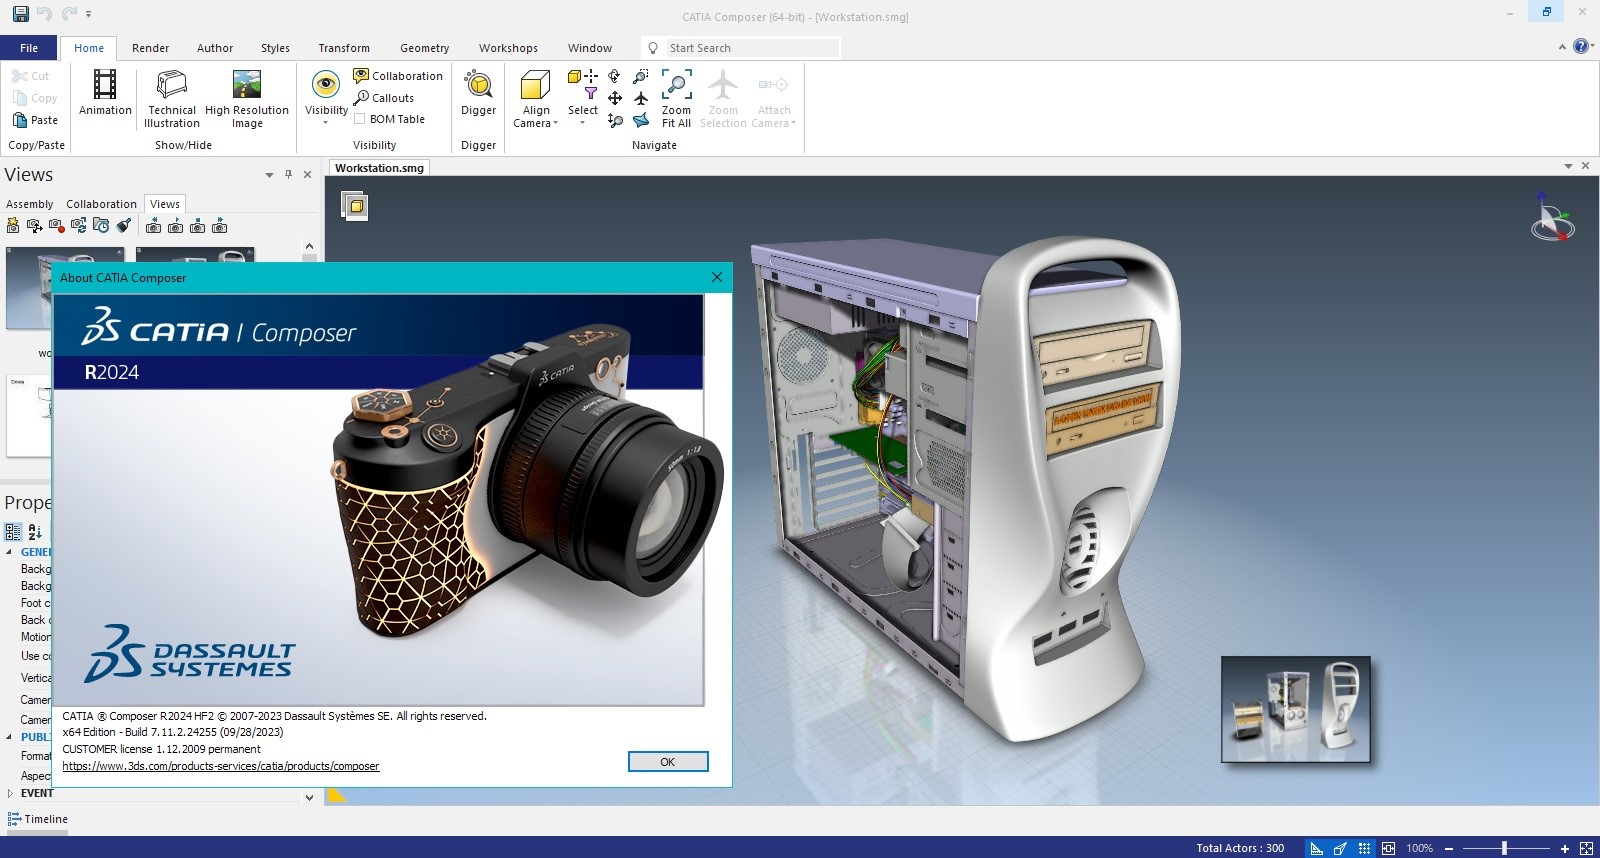 Working with DS CATIA Composer Refresh2 R2024 full